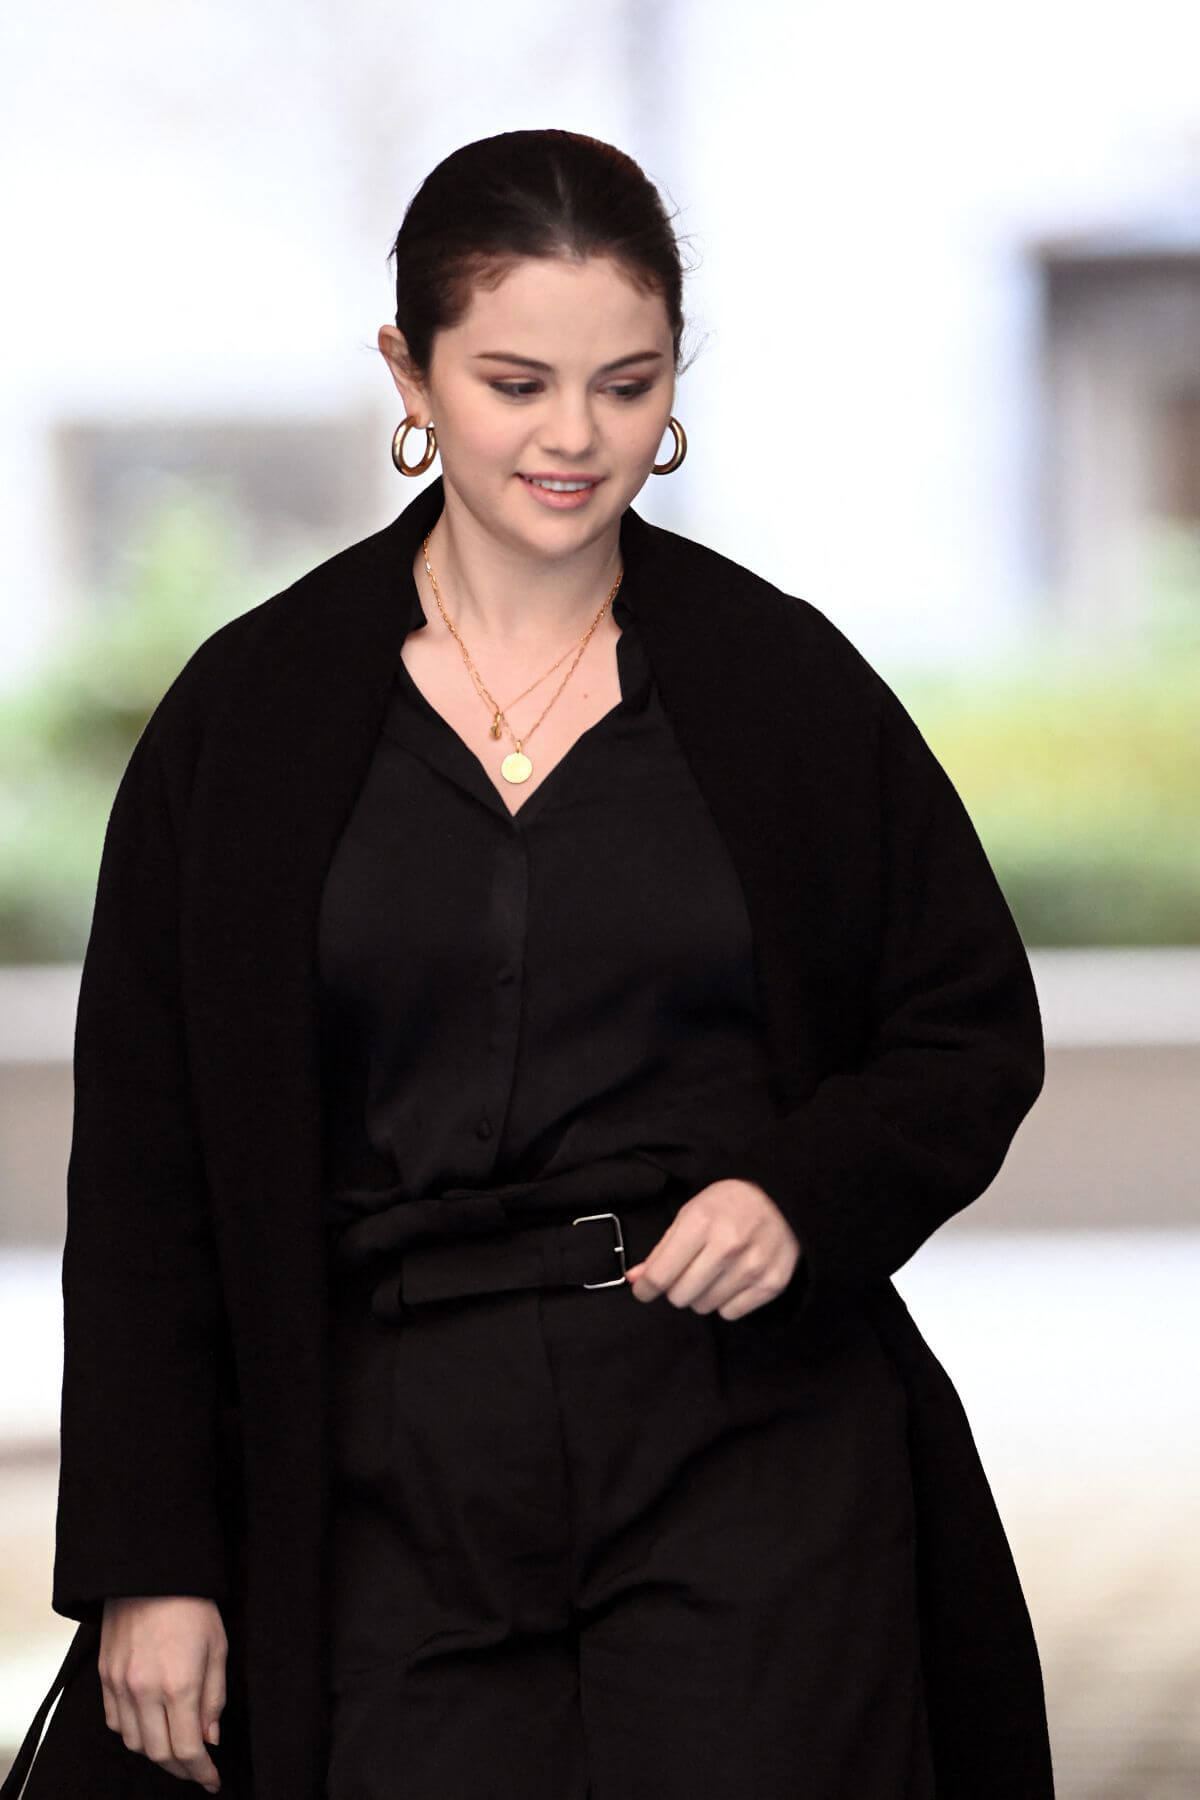 Selena Gomez Seen at Only Murders in the Building Set in New York 03/10/2021